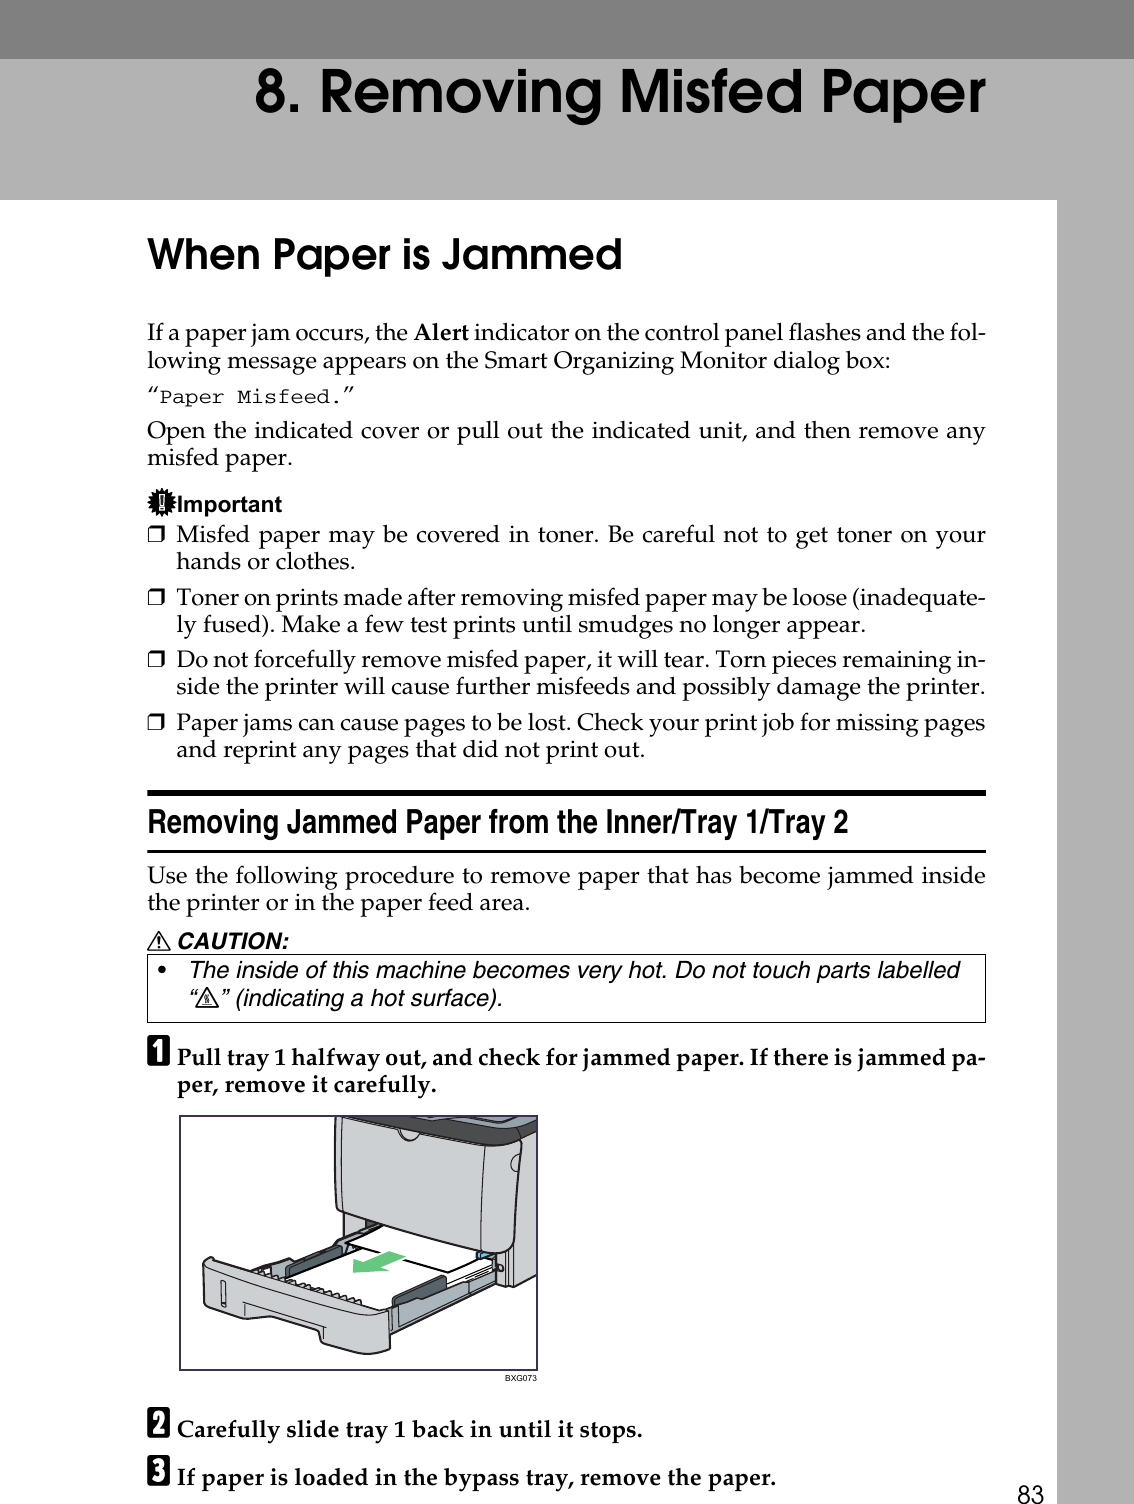 838. Removing Misfed PaperWhen Paper is JammedIf a paper jam occurs, the Alert indicator on the control panel flashes and the fol-lowing message appears on the Smart Organizing Monitor dialog box:“Paper Misfeed.”Open the indicated cover or pull out the indicated unit, and then remove anymisfed paper.Important❒Misfed paper may be covered in toner. Be careful not to get toner on yourhands or clothes.❒Toner on prints made after removing misfed paper may be loose (inadequate-ly fused). Make a few test prints until smudges no longer appear.❒Do not forcefully remove misfed paper, it will tear. Torn pieces remaining in-side the printer will cause further misfeeds and possibly damage the printer.❒Paper jams can cause pages to be lost. Check your print job for missing pagesand reprint any pages that did not print out.Removing Jammed Paper from the Inner/Tray 1/Tray 2Use the following procedure to remove paper that has become jammed insidethe printer or in the paper feed area.R CAUTION:APull tray 1 halfway out, and check for jammed paper. If there is jammed pa-per, remove it carefully.BCarefully slide tray 1 back in until it stops.CIf paper is loaded in the bypass tray, remove the paper.•The inside of this machine becomes very hot. Do not touch parts labelled “v” (indicating a hot surface).BXG073